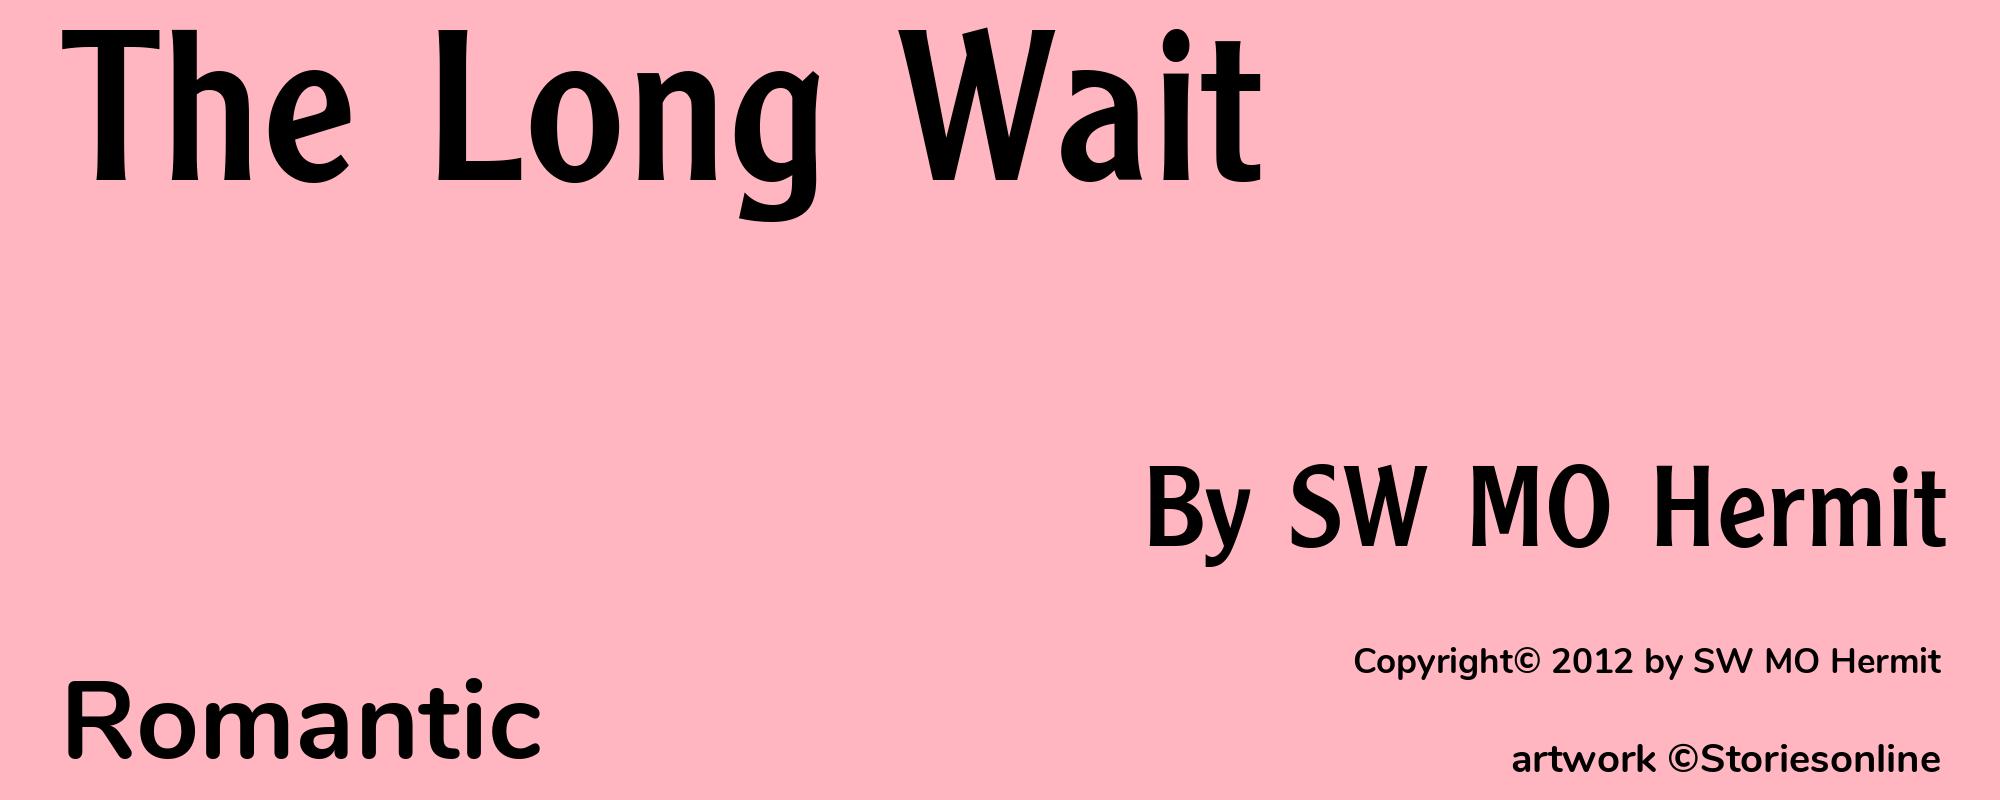 The Long Wait - Cover